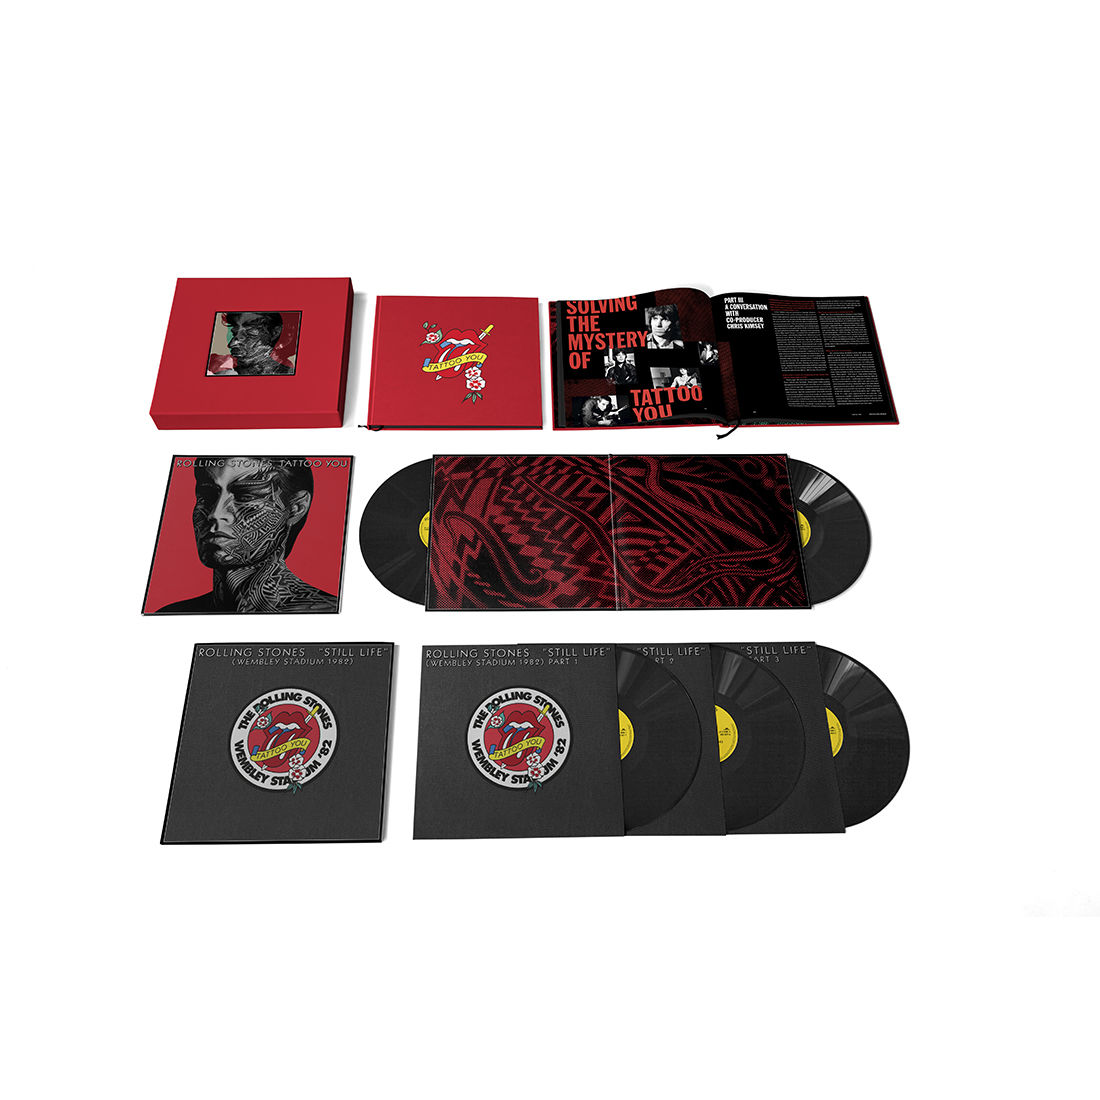 The Rolling Stones - Tattoo You (40th Anniversary Remaster): Super Deluxe 5LP Boxset